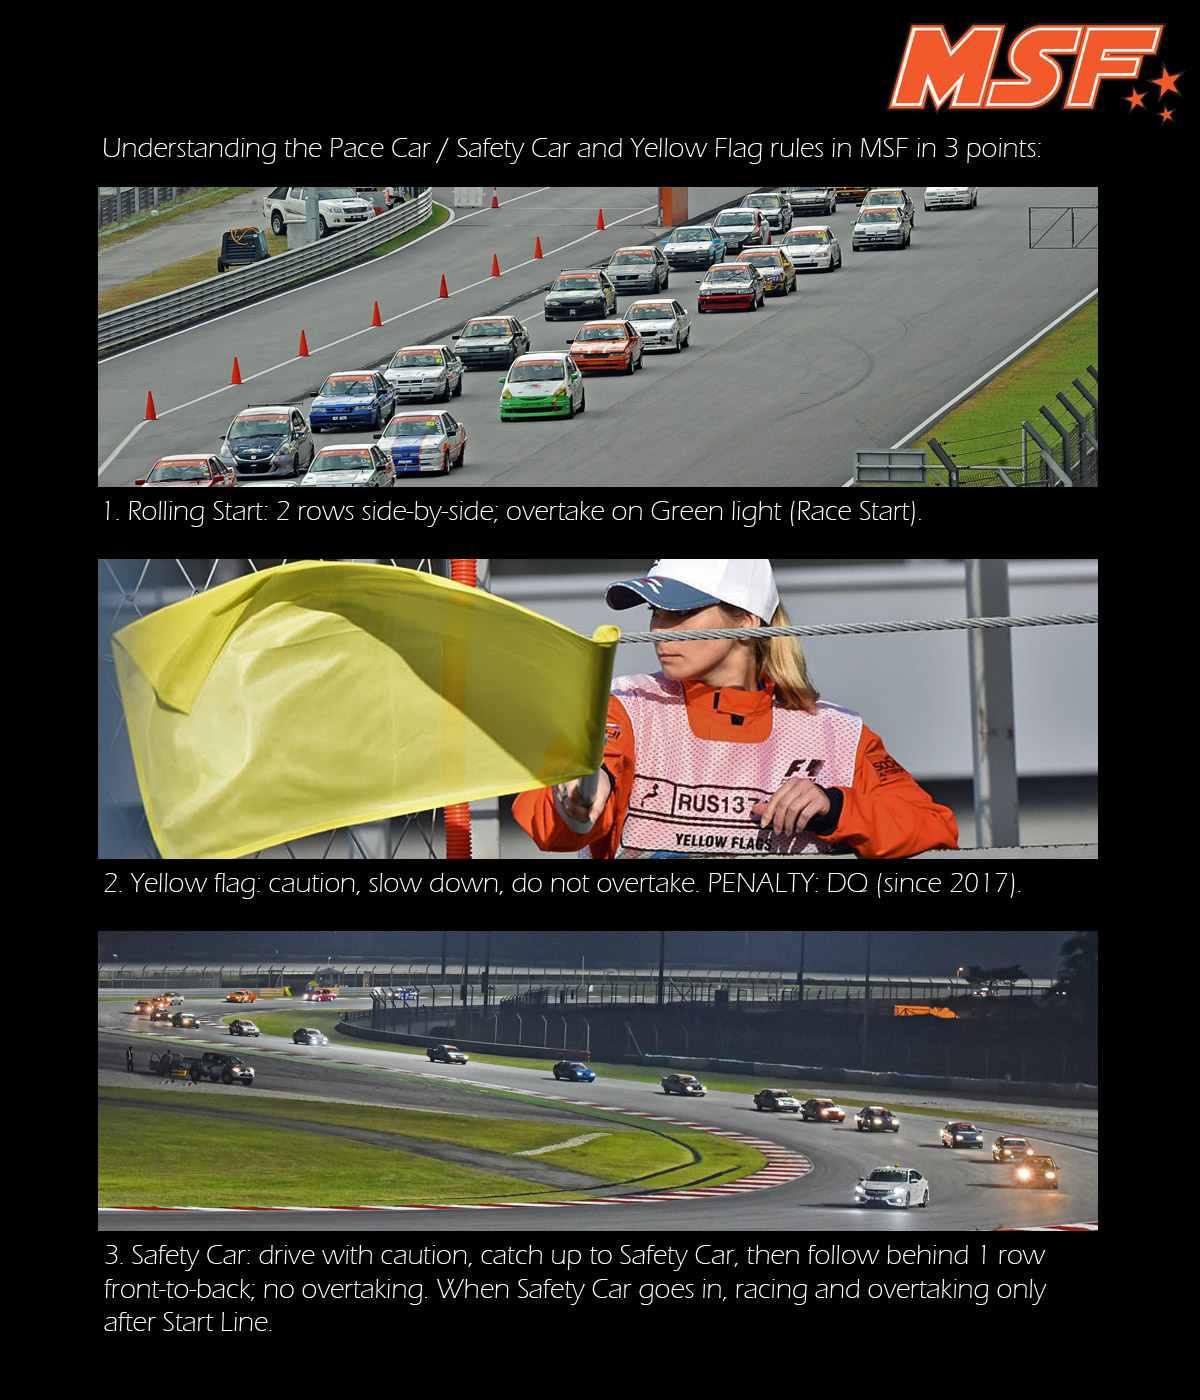 Understanding the Pace Car / Safety Car / Yellow flags in MSF